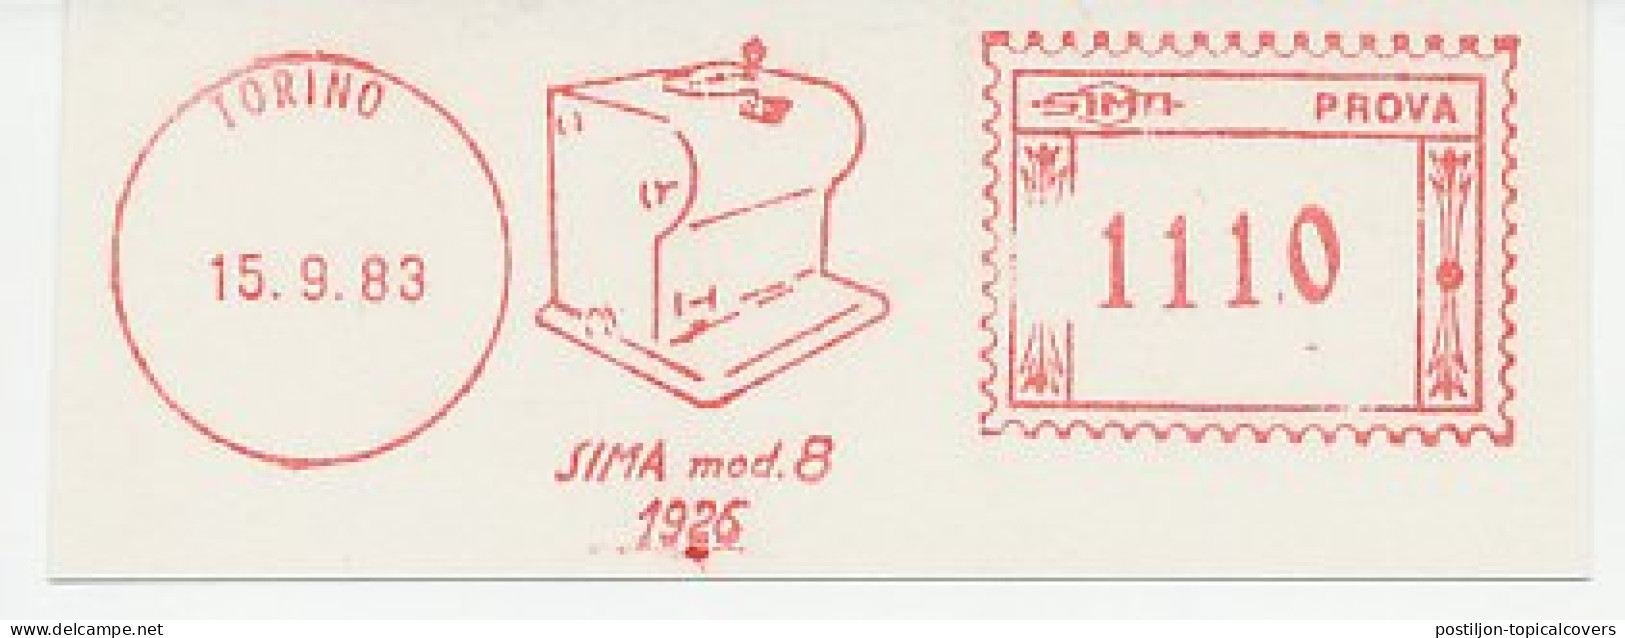 Proof Meter Cut Italy 1983 Sima - Mod. 8 1926 - Machine Labels [ATM]